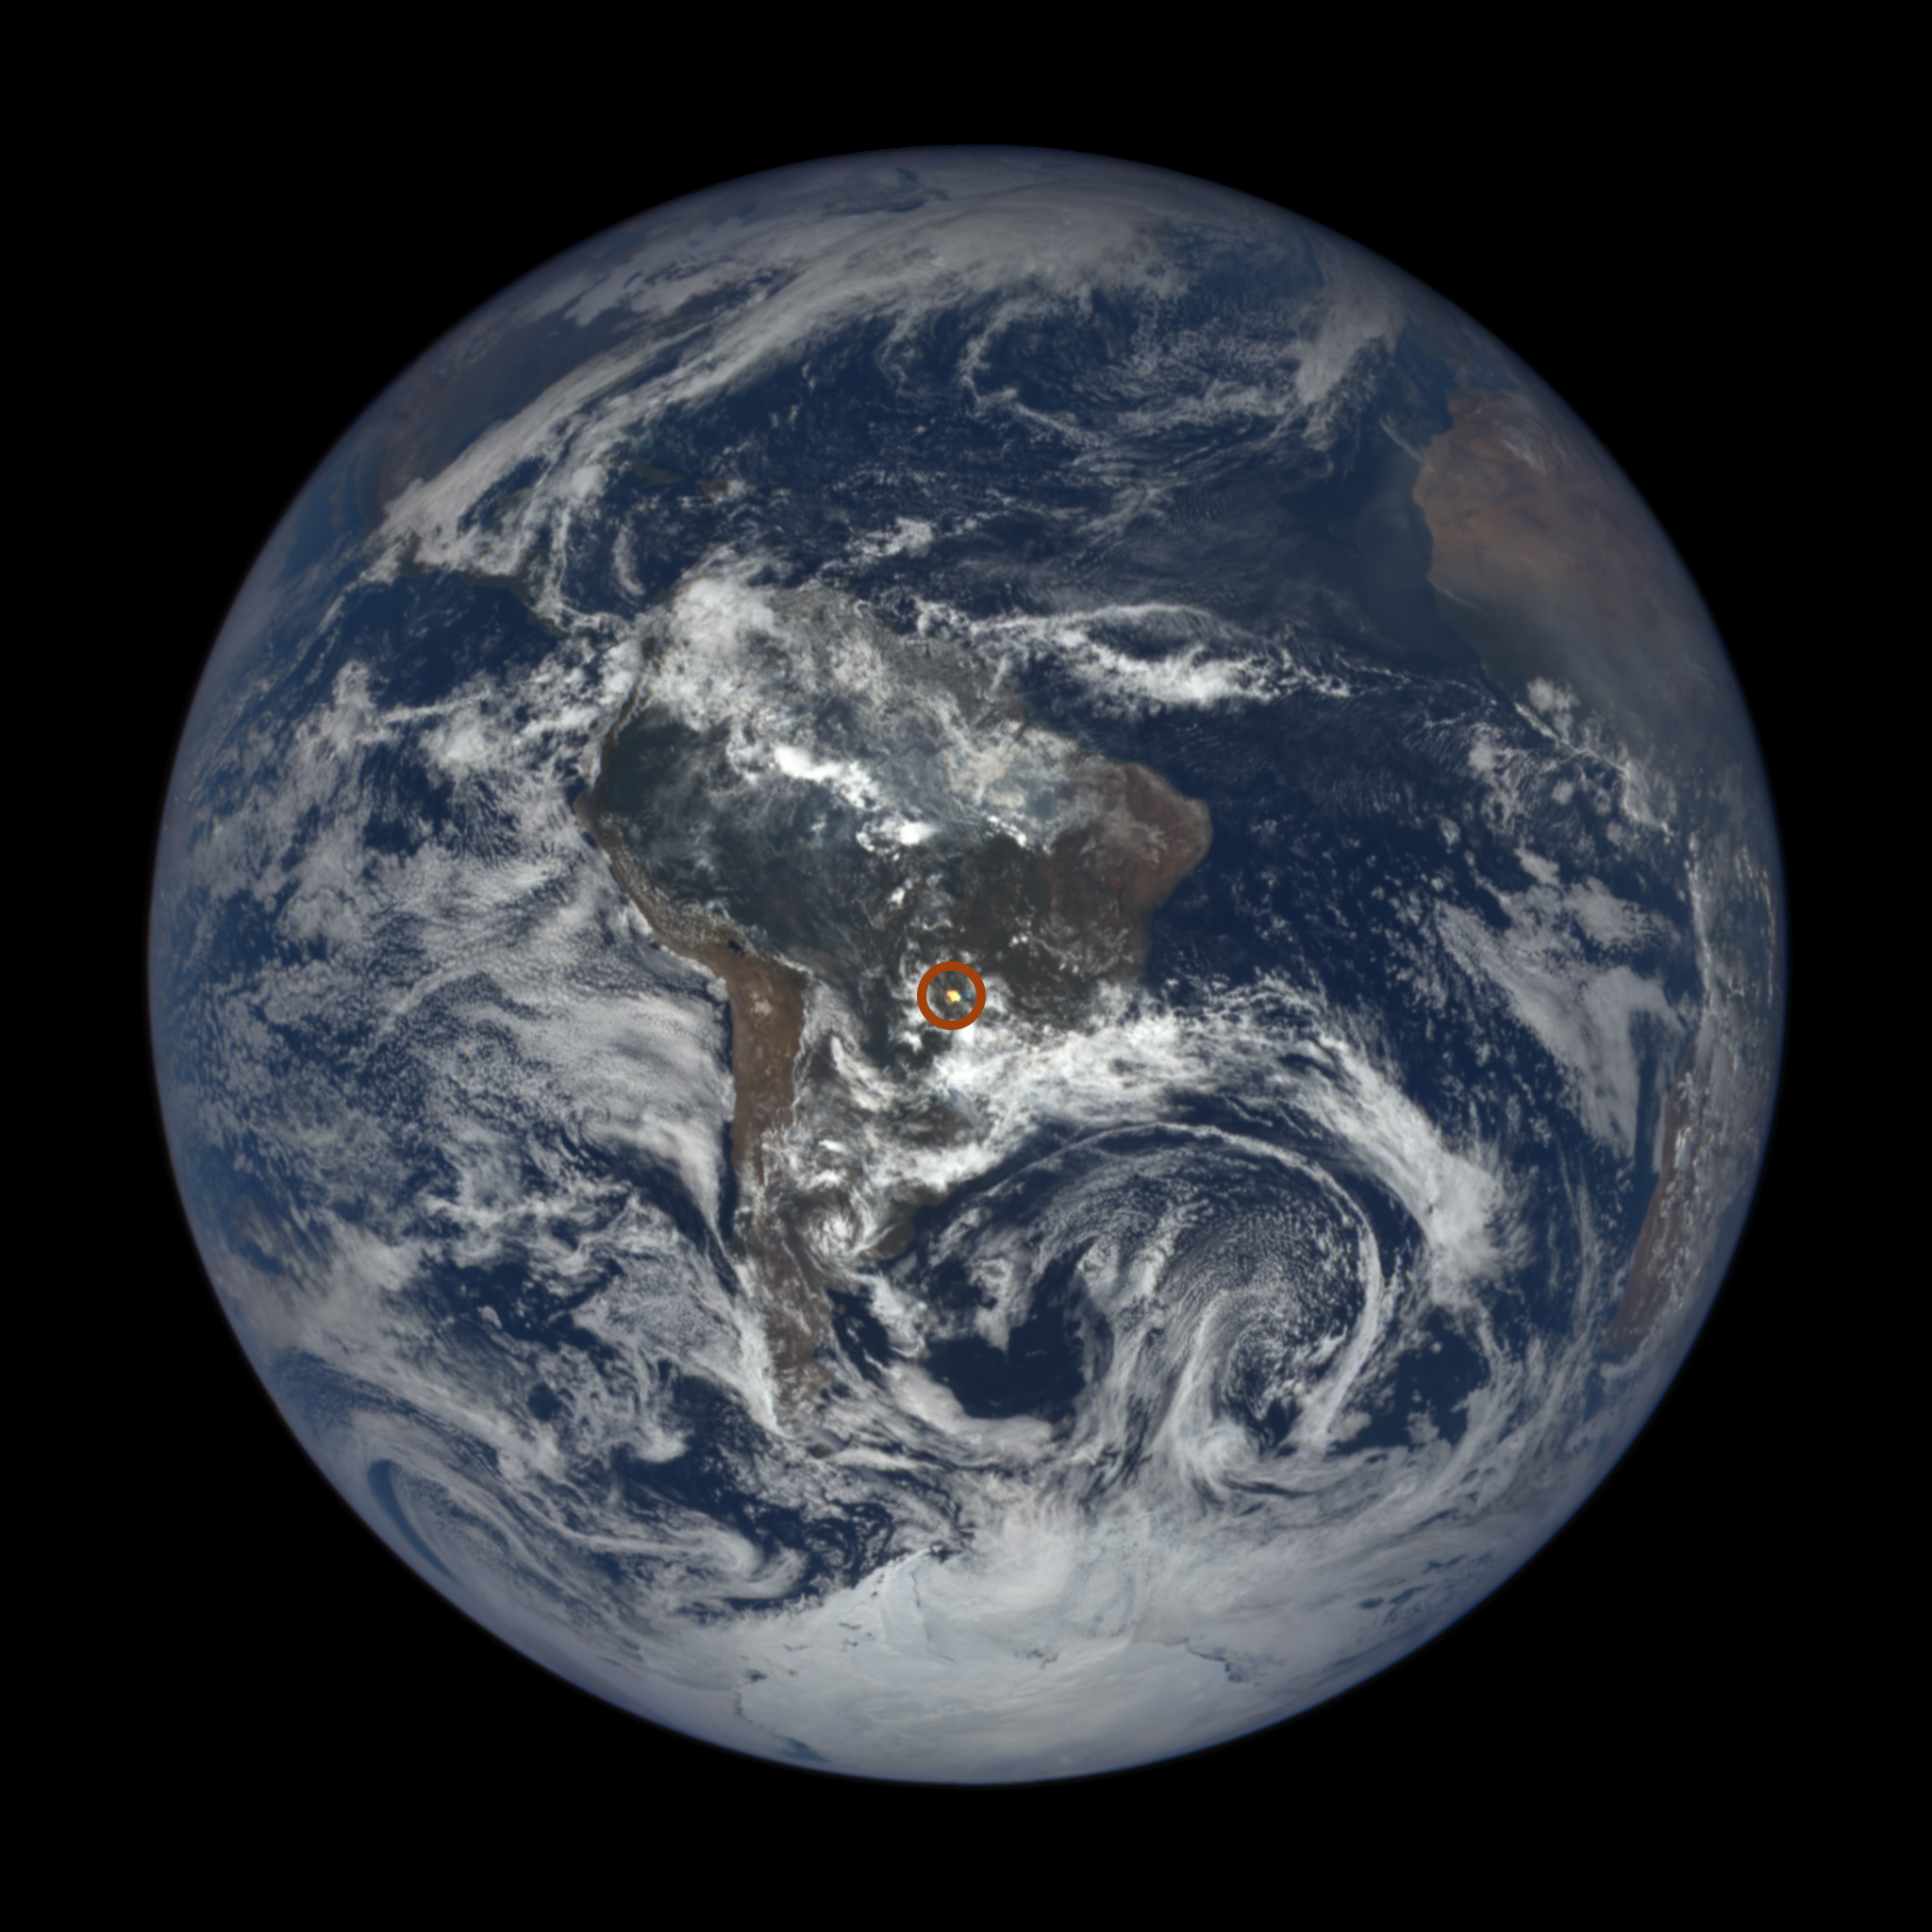 full globe image of Earth with flash in S. America